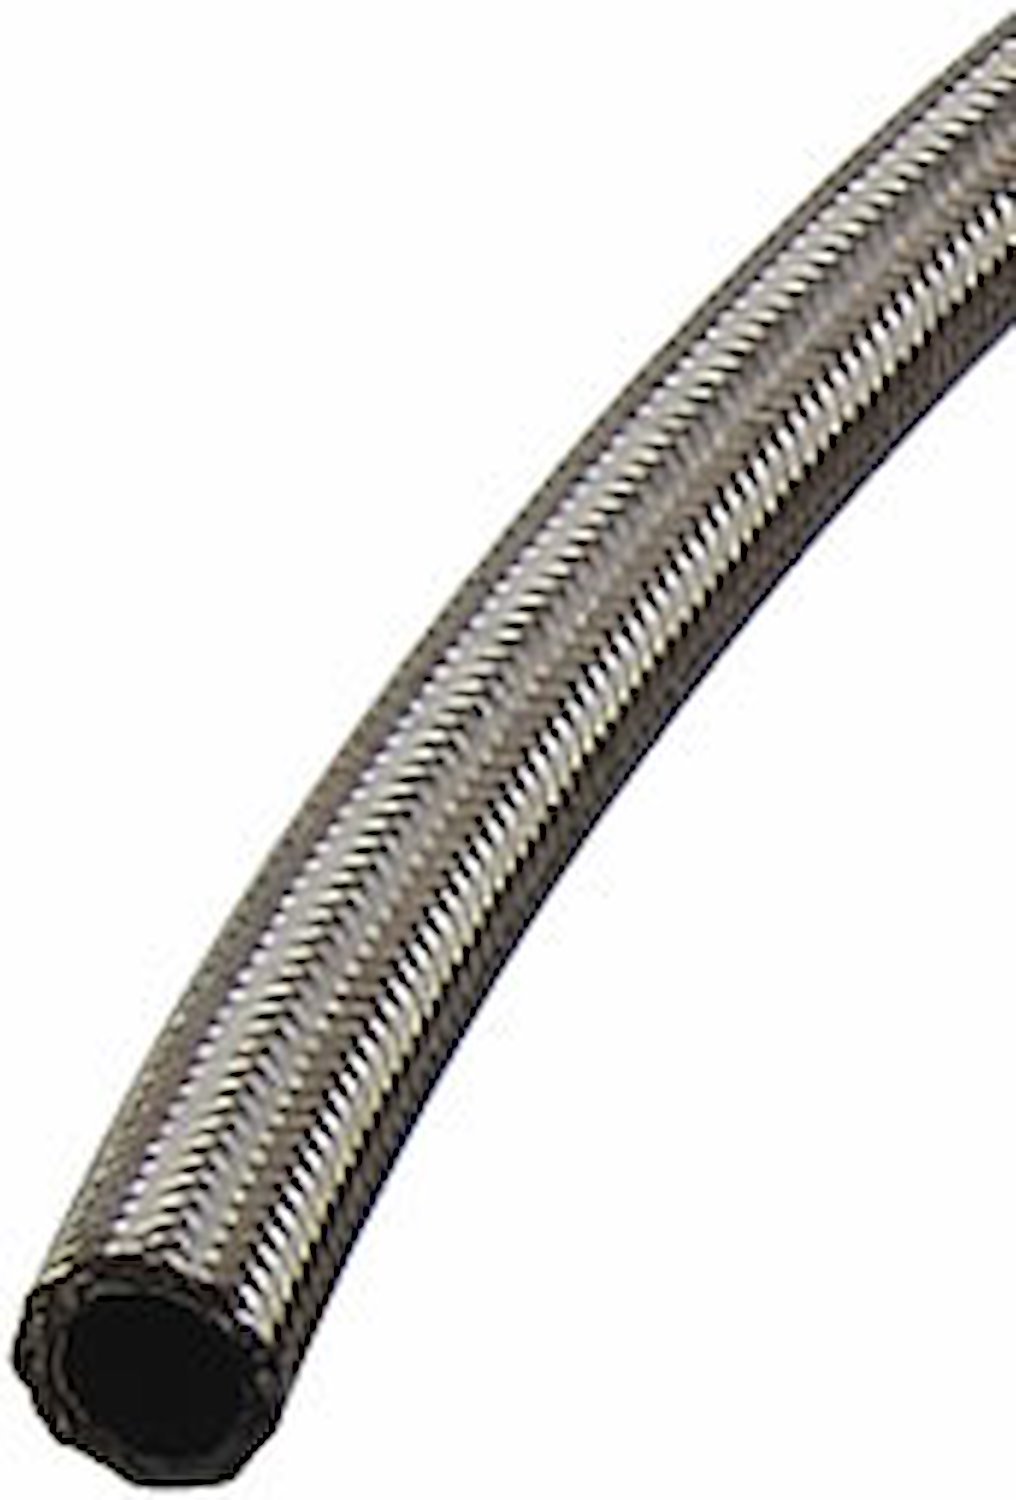 Pro-Flo 200 Series Stainless Steel Braided Hose -12 AN [15 ft.]